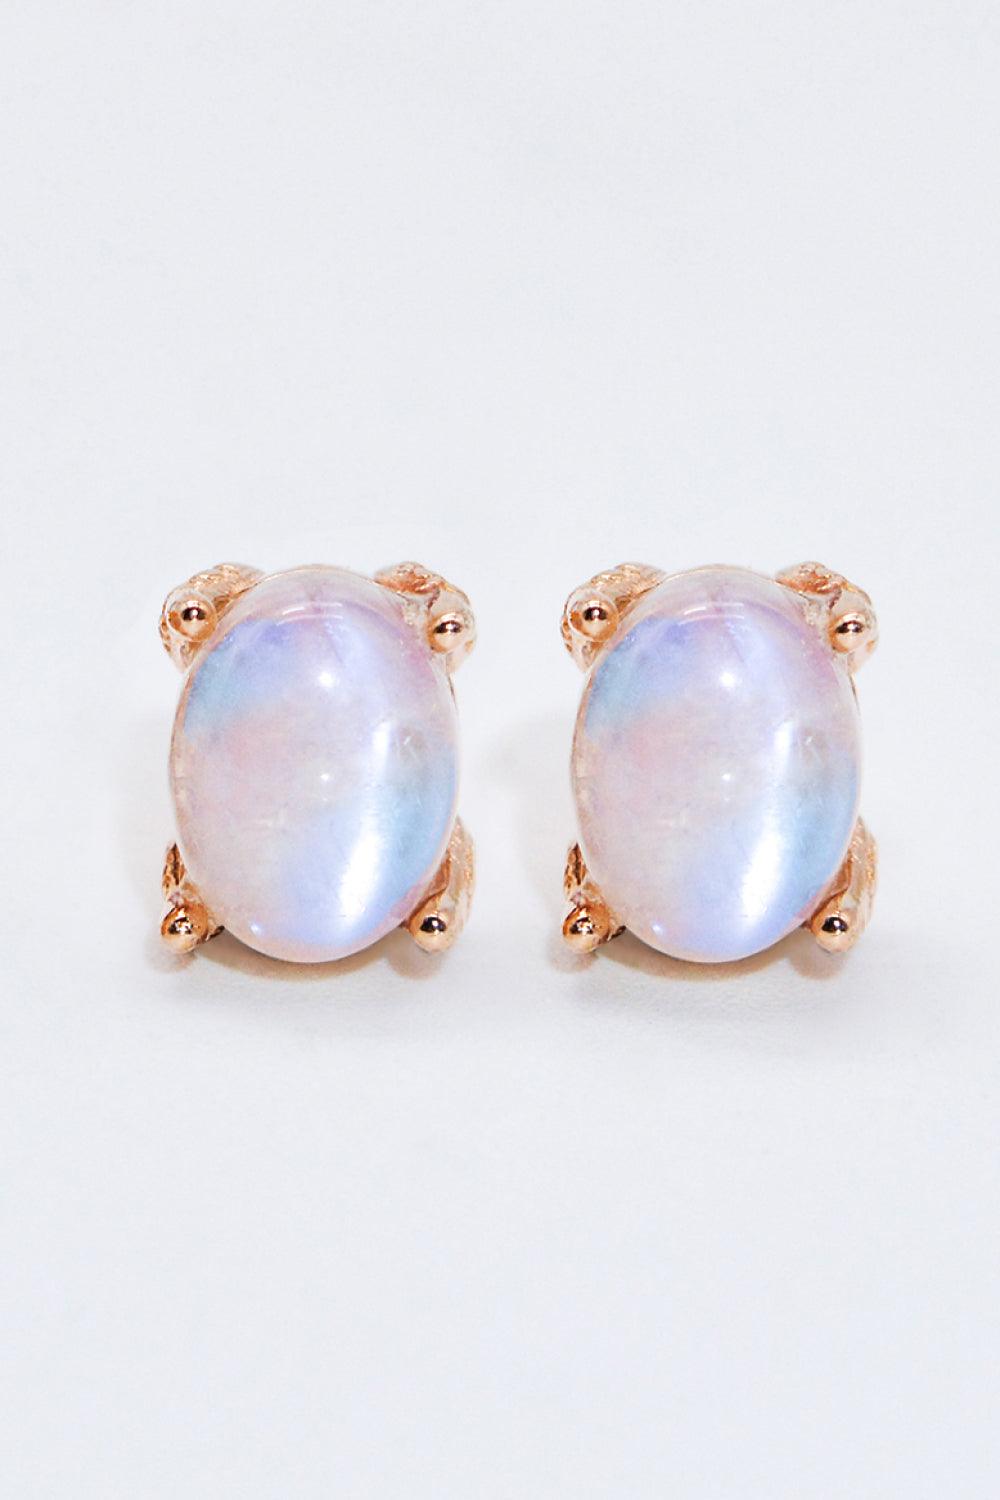 Natural Moonstone 4-Prong Stud Earrings - Glamorous Boutique USA L.L.C.